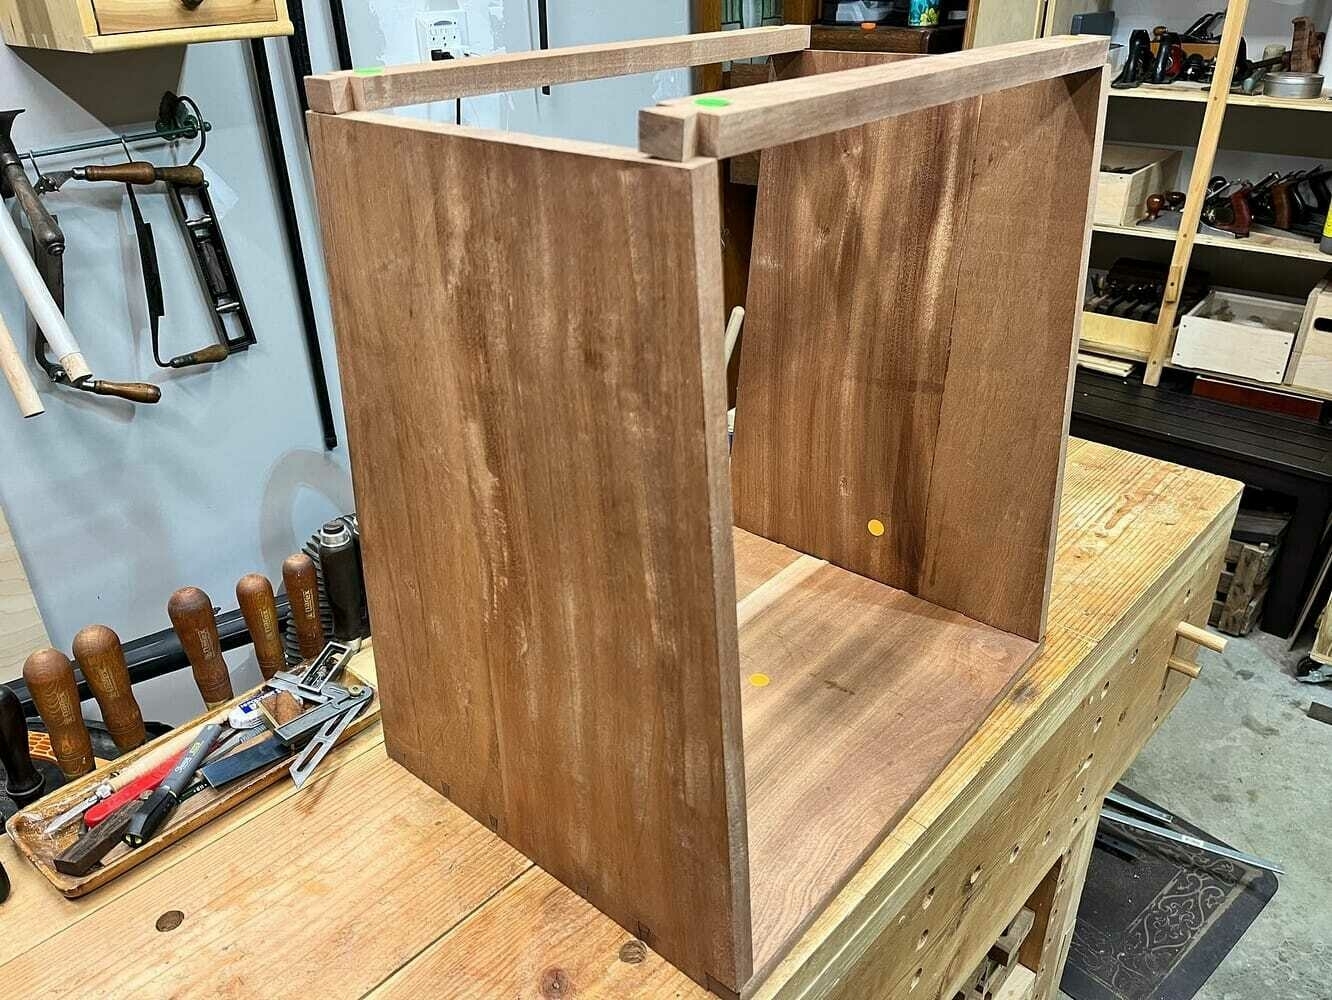 Dry fit cabinet with two arms cut with dovetails for holding the top together.